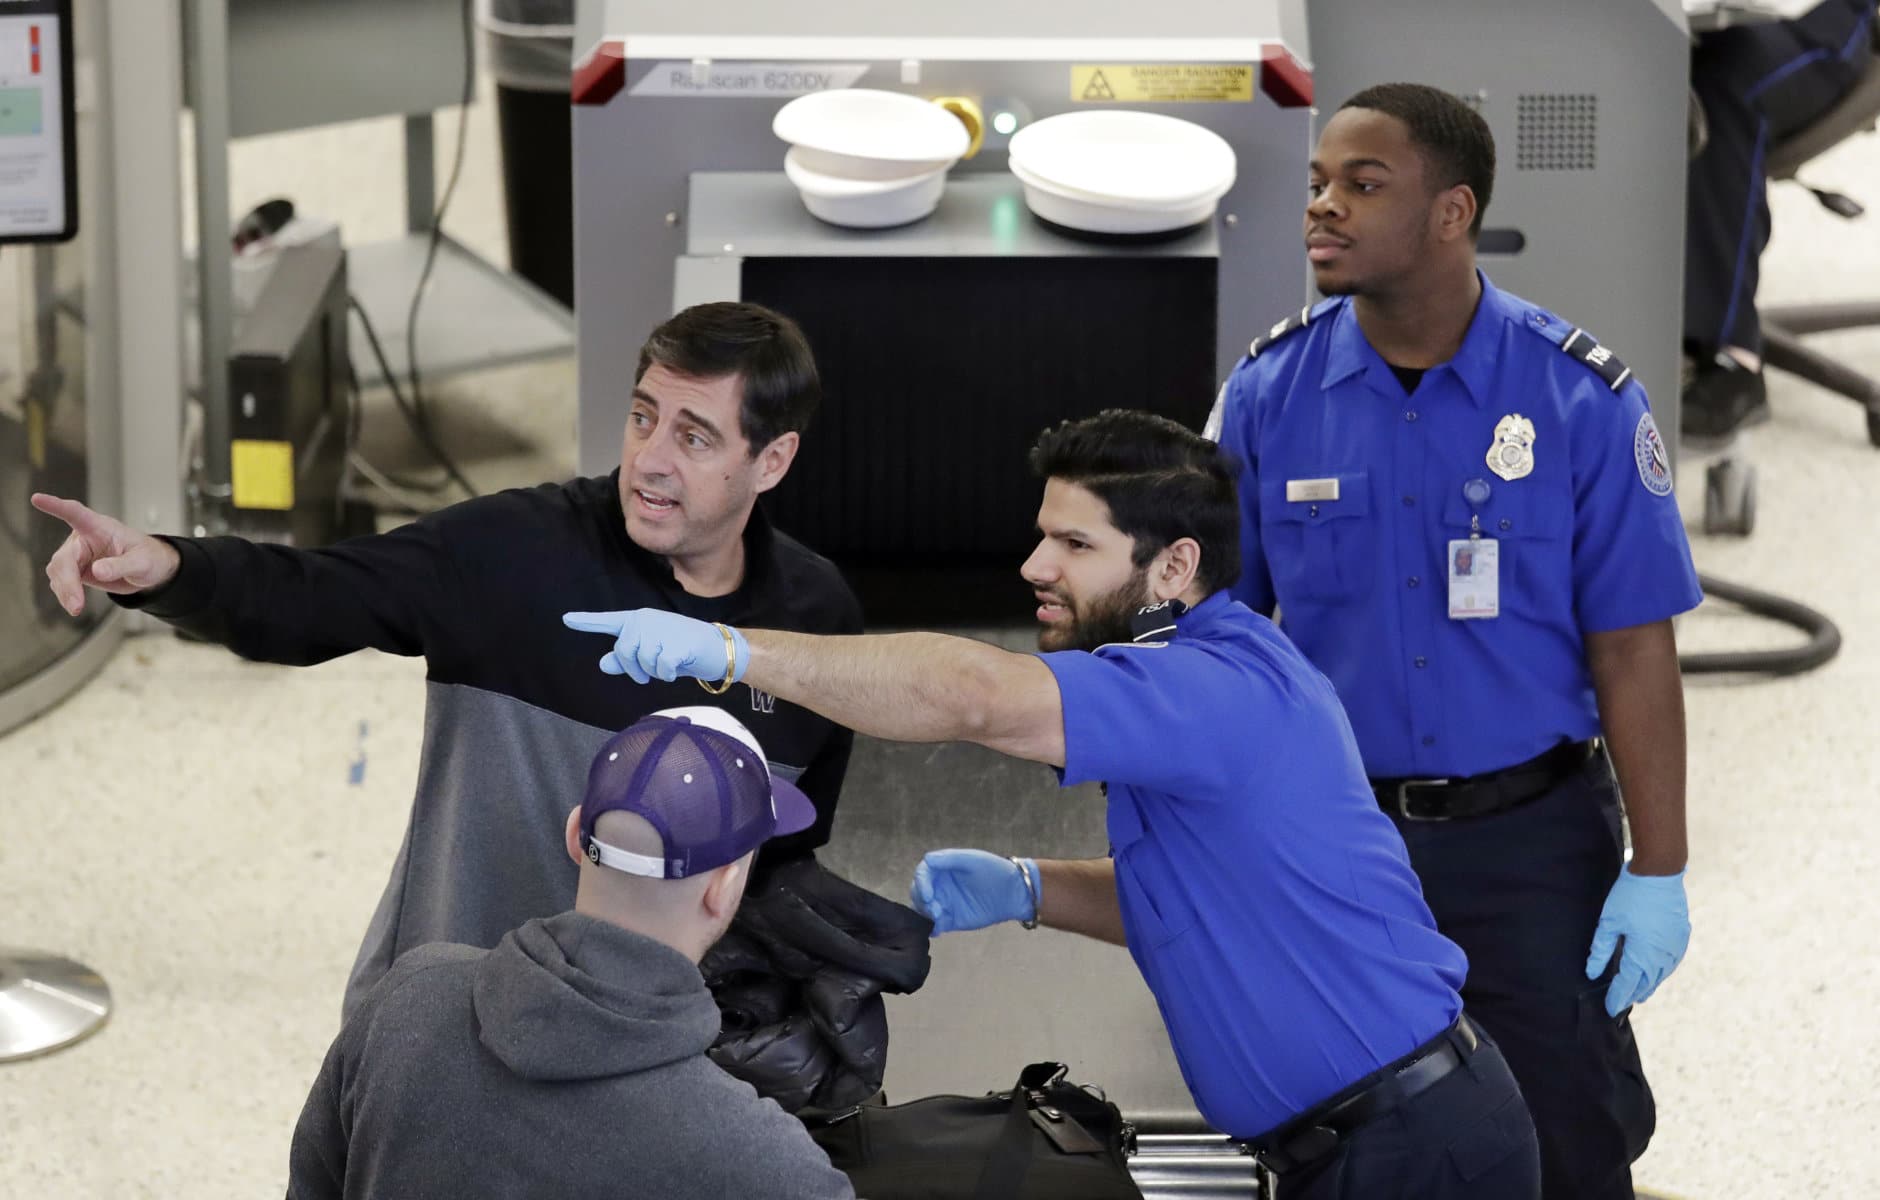 A Transportation Security Administration (TSA) officer directs a traveler as another looks on at a security screening area during a partial federal government shutdown Monday, Dec. 31, 2018, in SeaTac, Wash. TSA staff are among tens of thousands of federal employees considered essential as the federal government shutdown moves into its second week. They are working without pay until the shutdown ends, but will likely be paid retroactively later on. (AP Photo/Elaine Thompson)